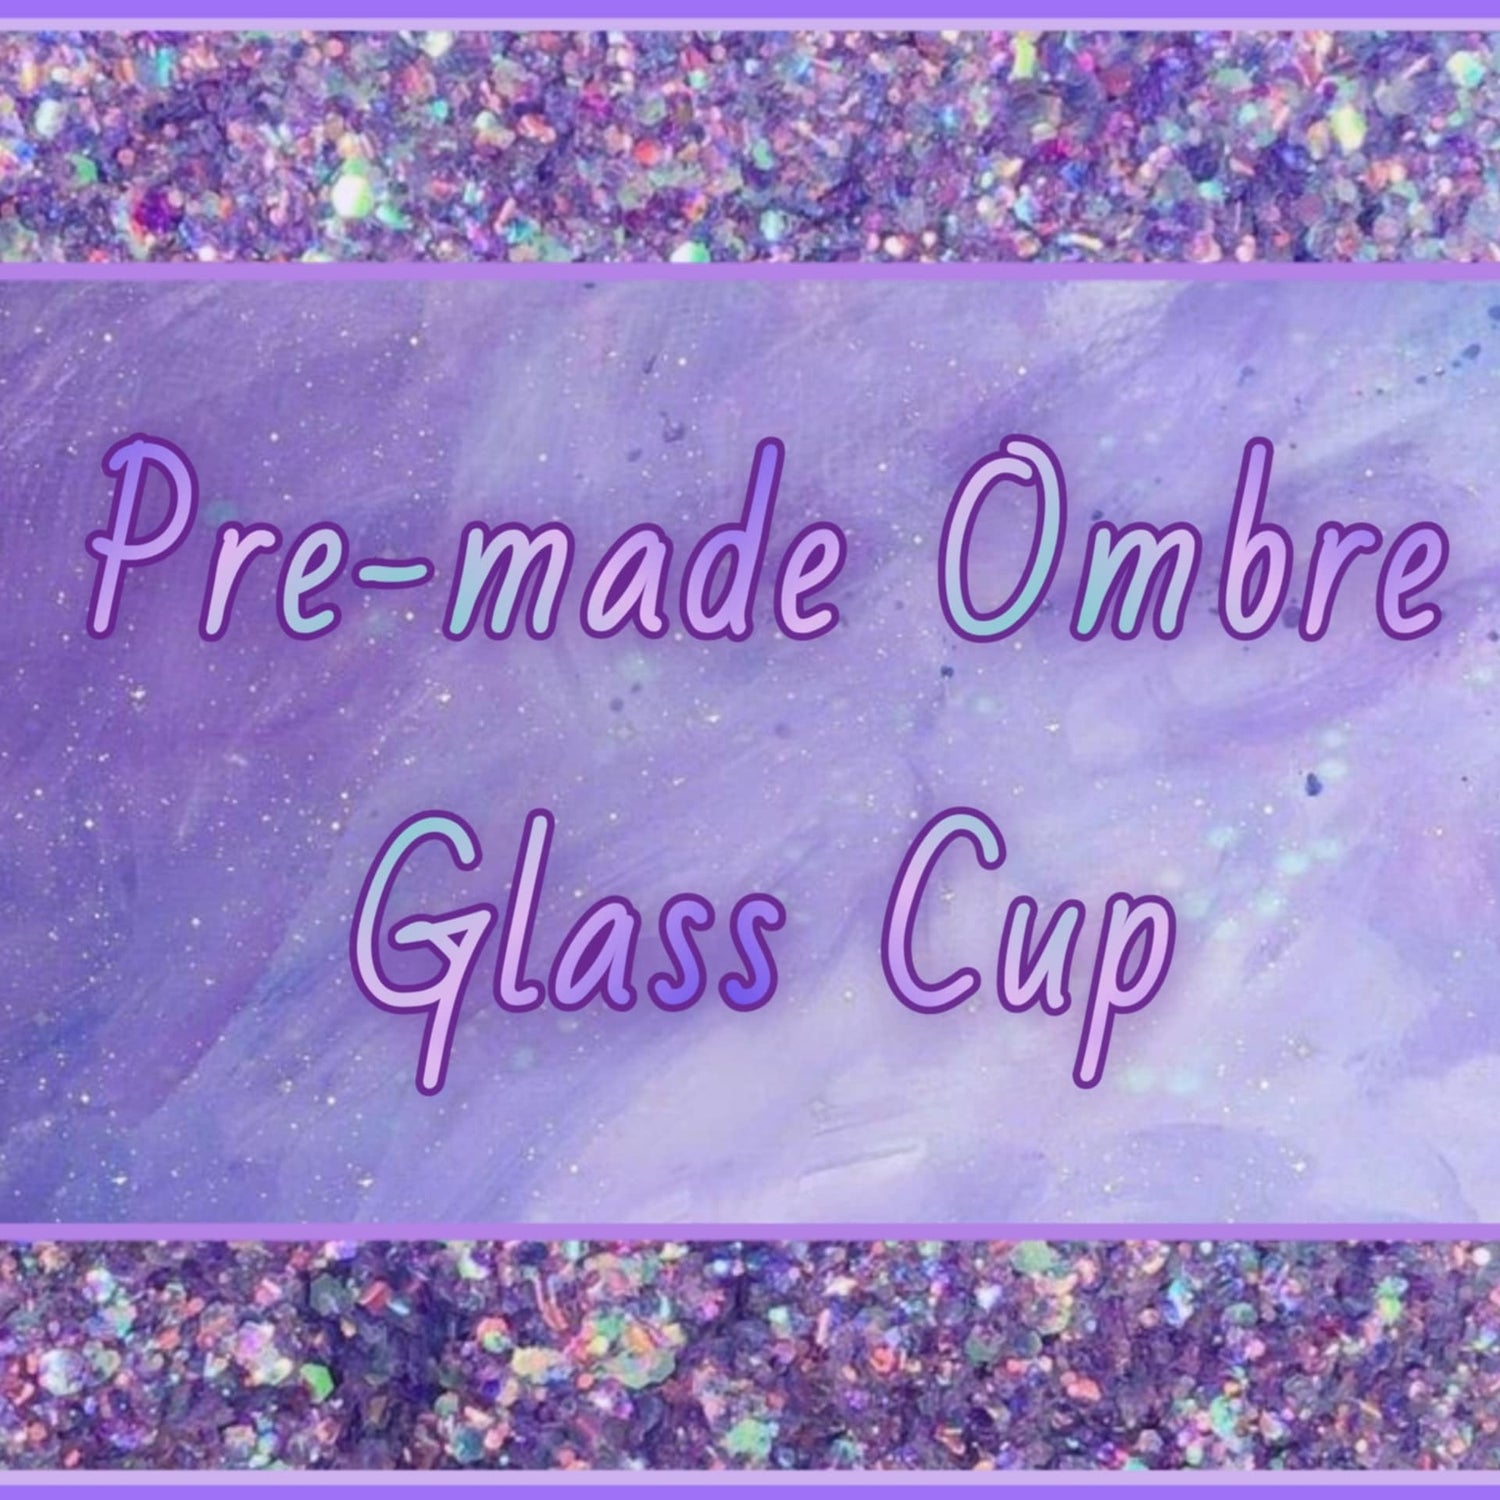 PRE-MADE Ombre Glass Cup